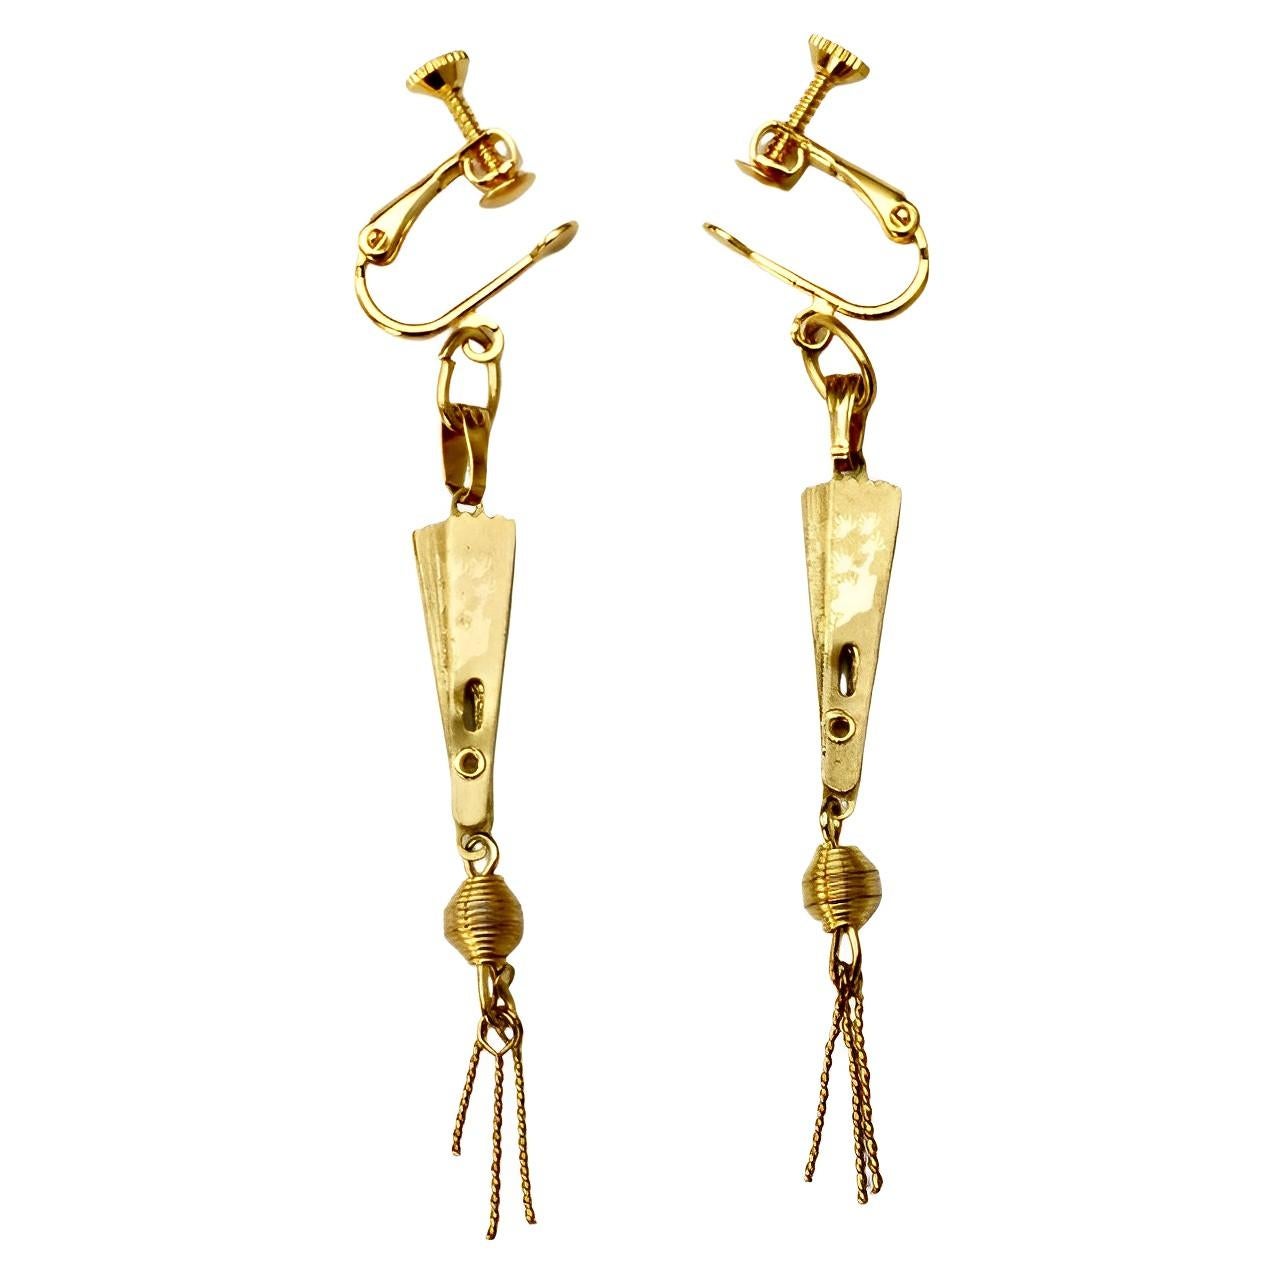 Lovely gold tone screw back earrings, featuring a fan with Chinese style decoration to the back and front. The fan opens and closes. The screw back fittings are not the originals. Measuring length 7 cm / 2.75 inches, including the fittings.

This